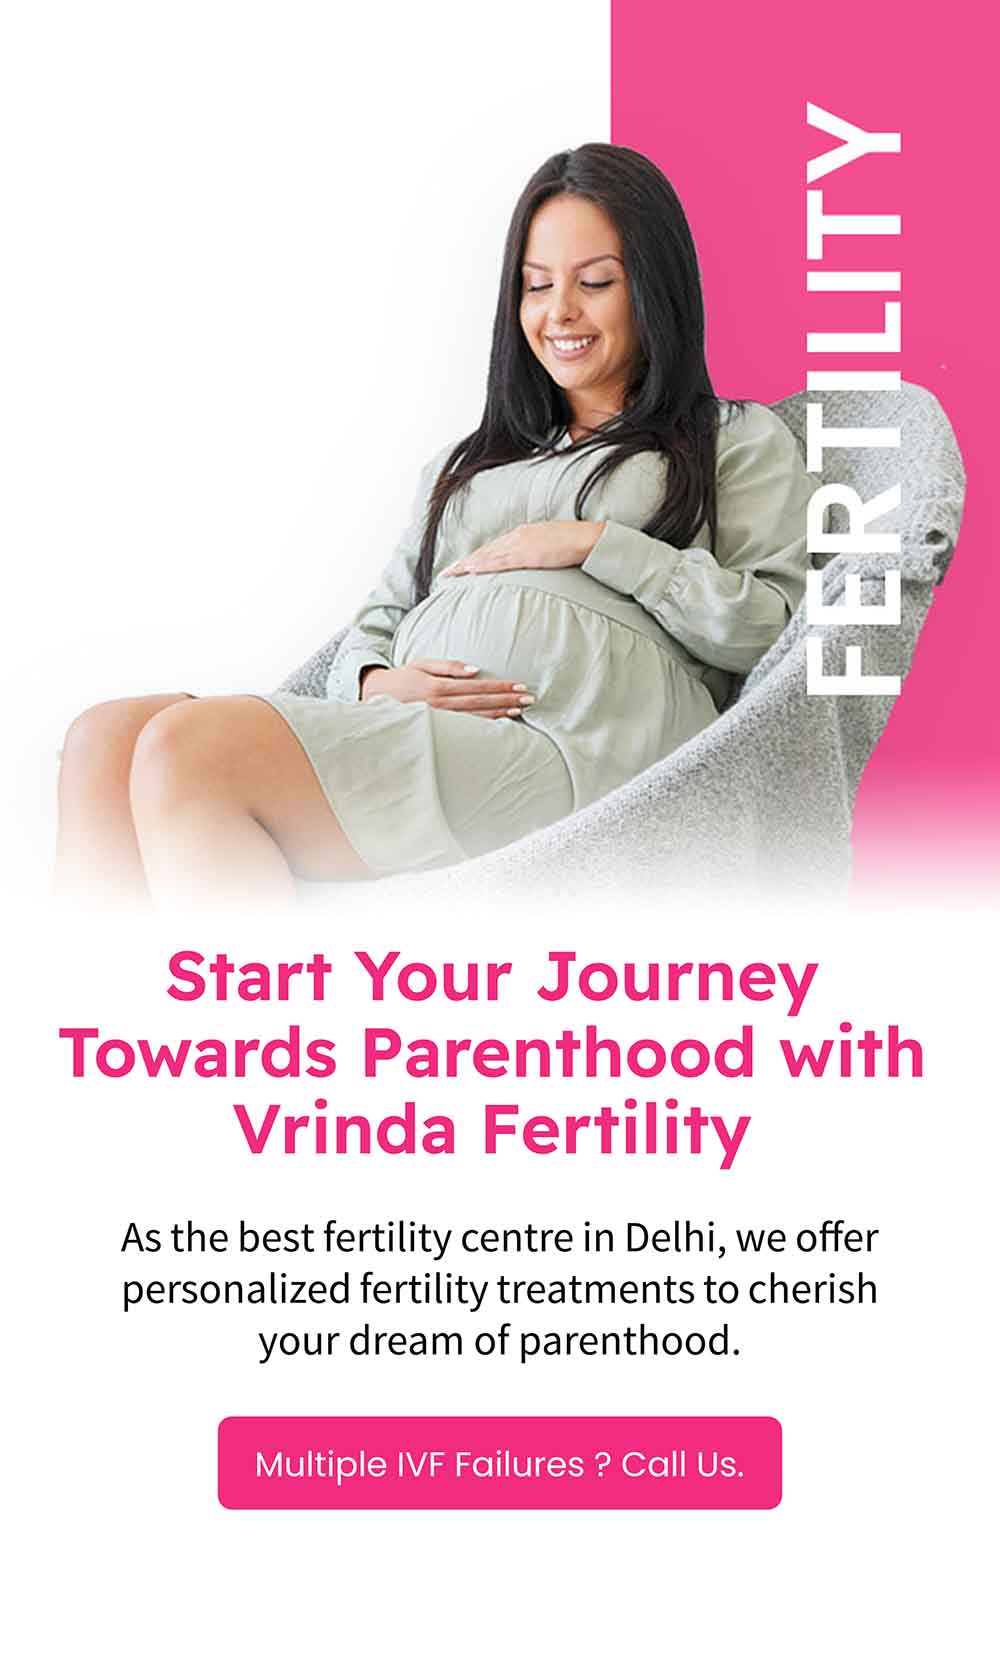 Fertility Solutions for Your Journey